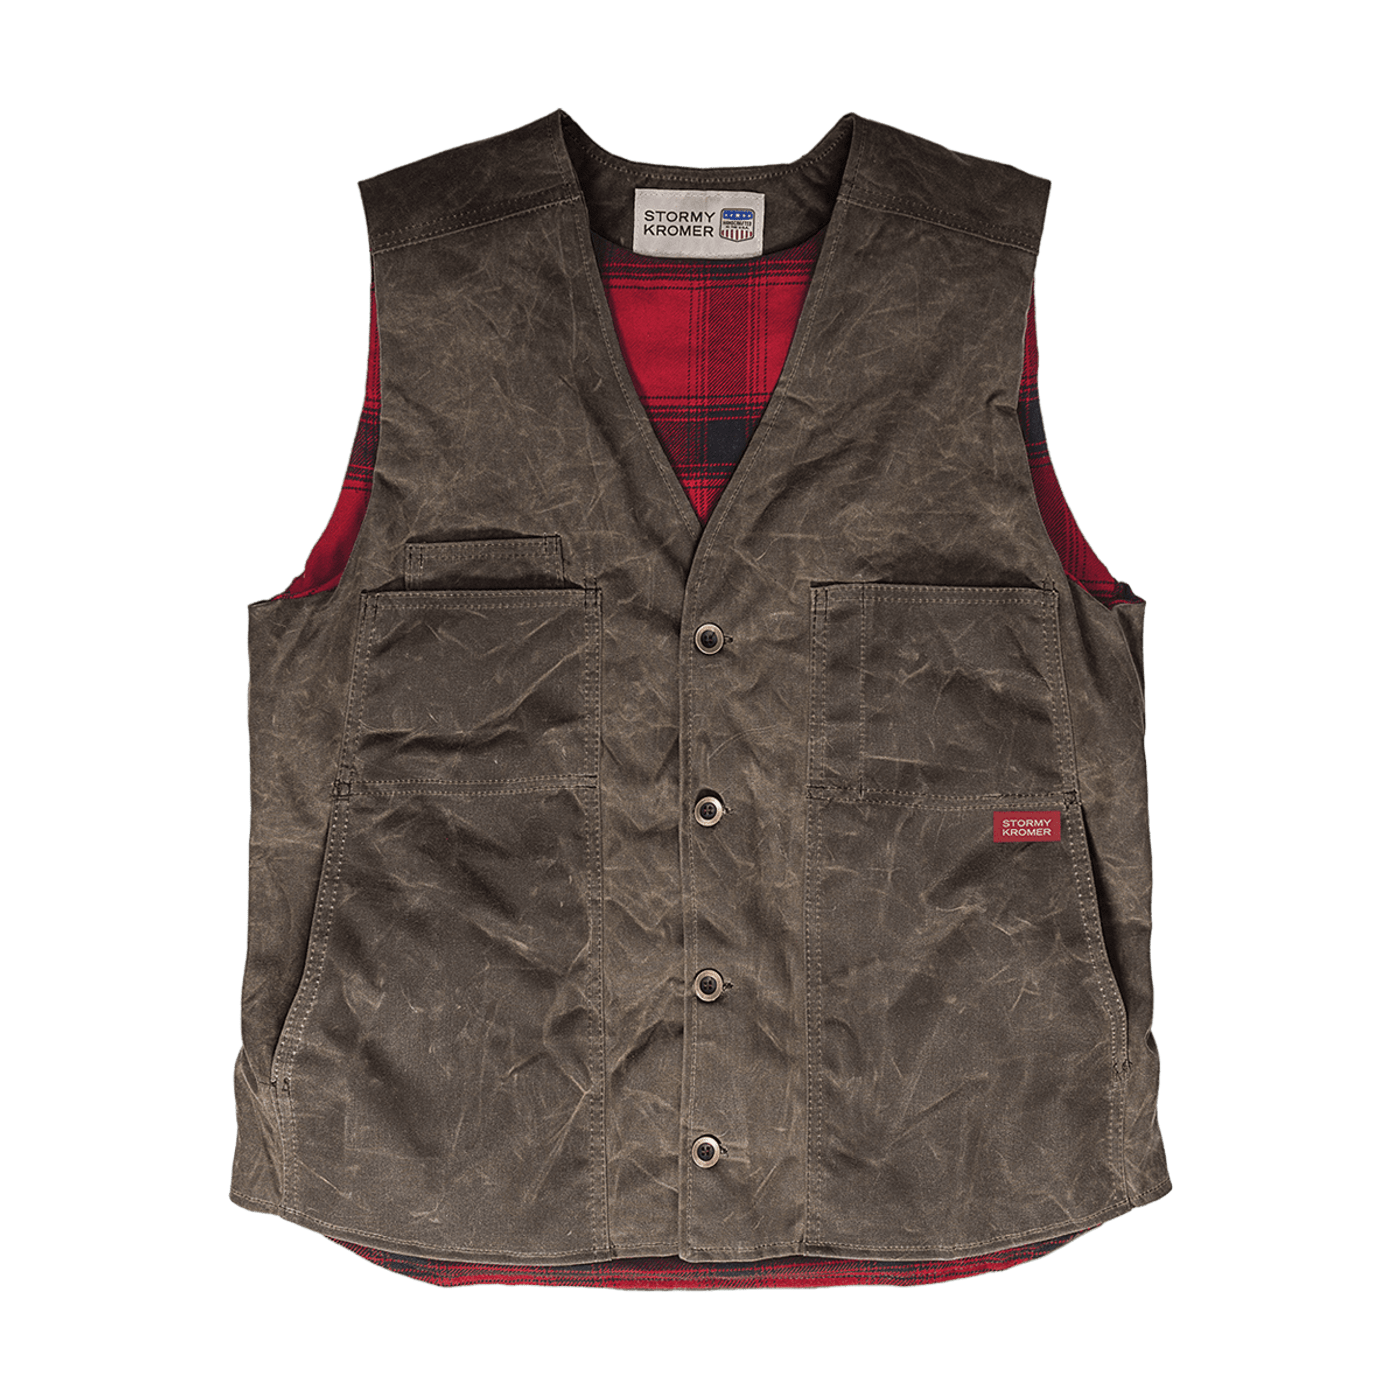 The Waxed Cotton Vest with Lining